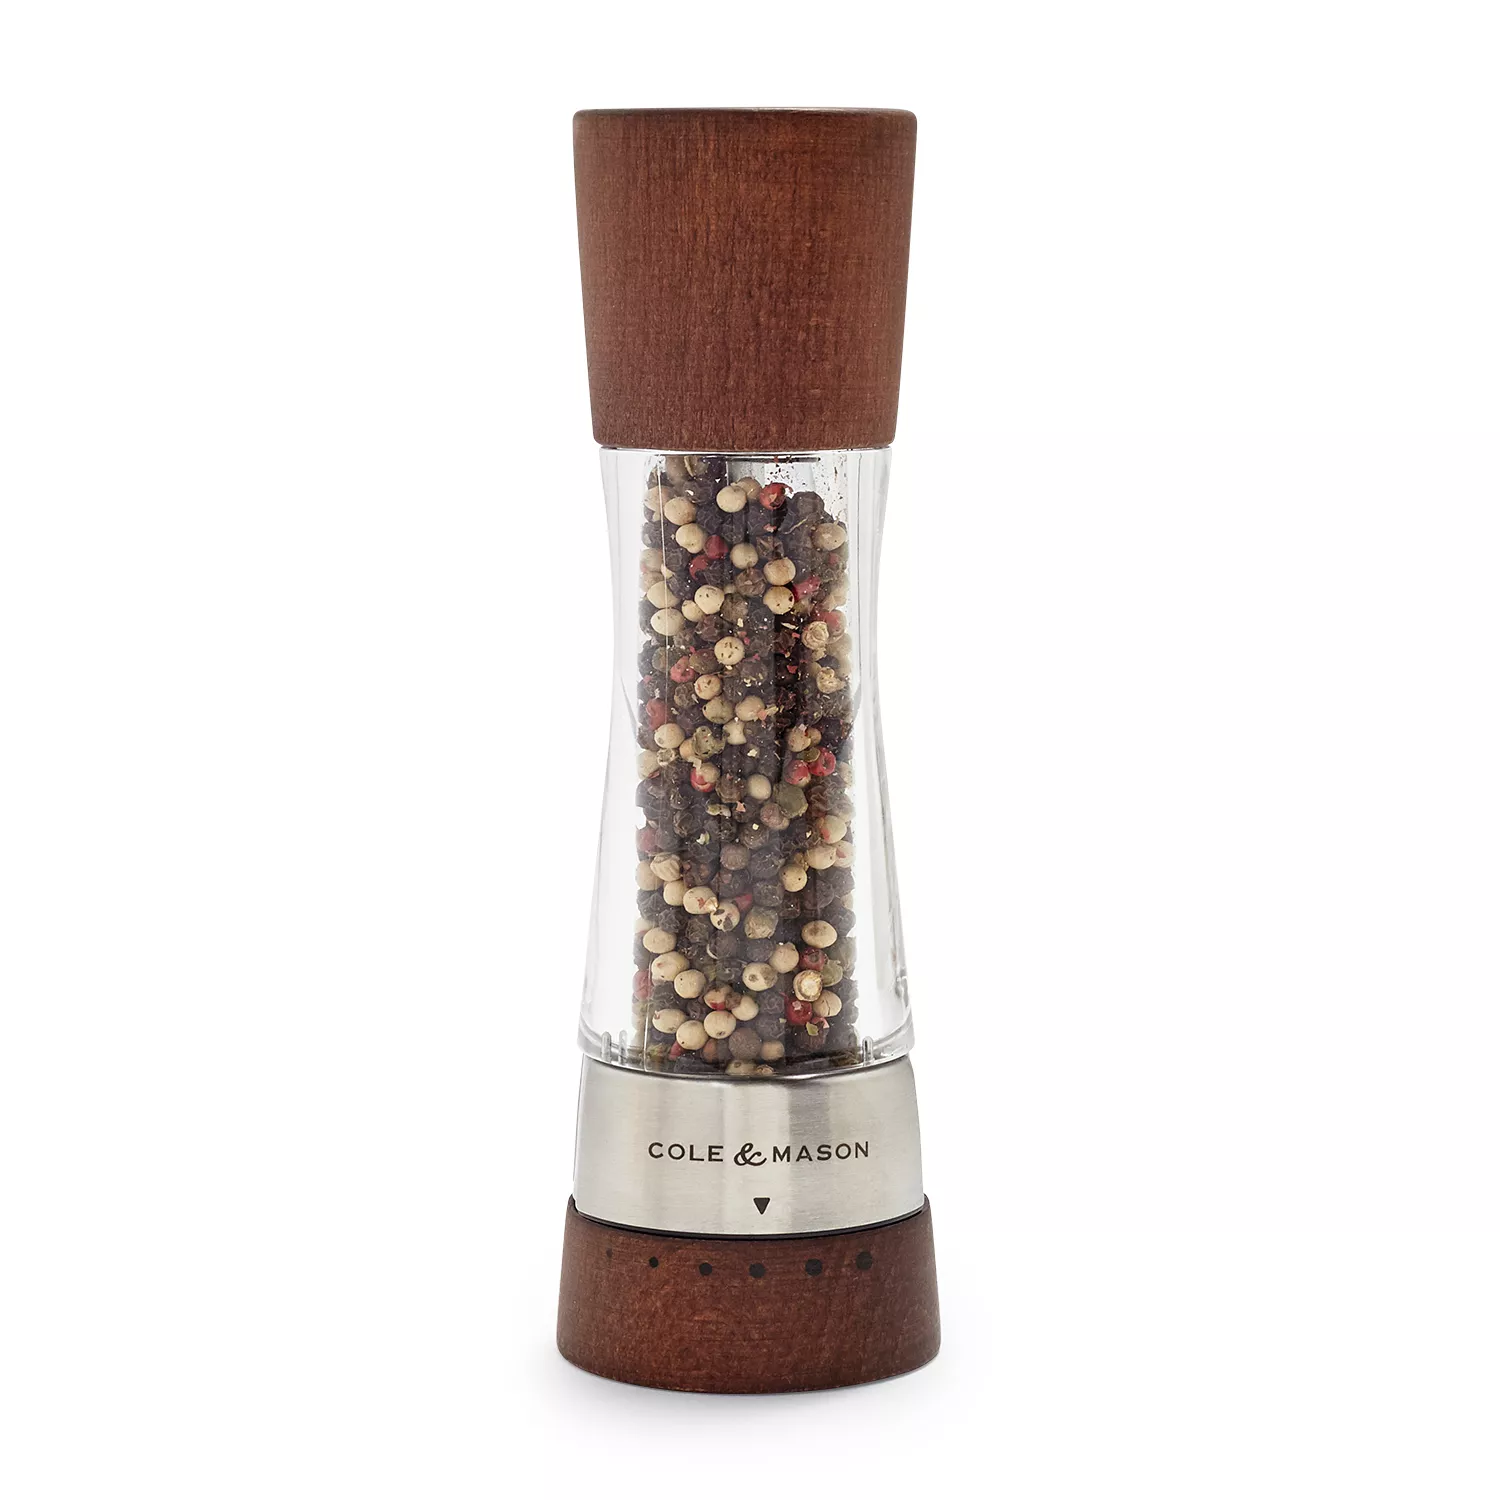 OXO POP Brown Sugar Keeper - The Peppermill